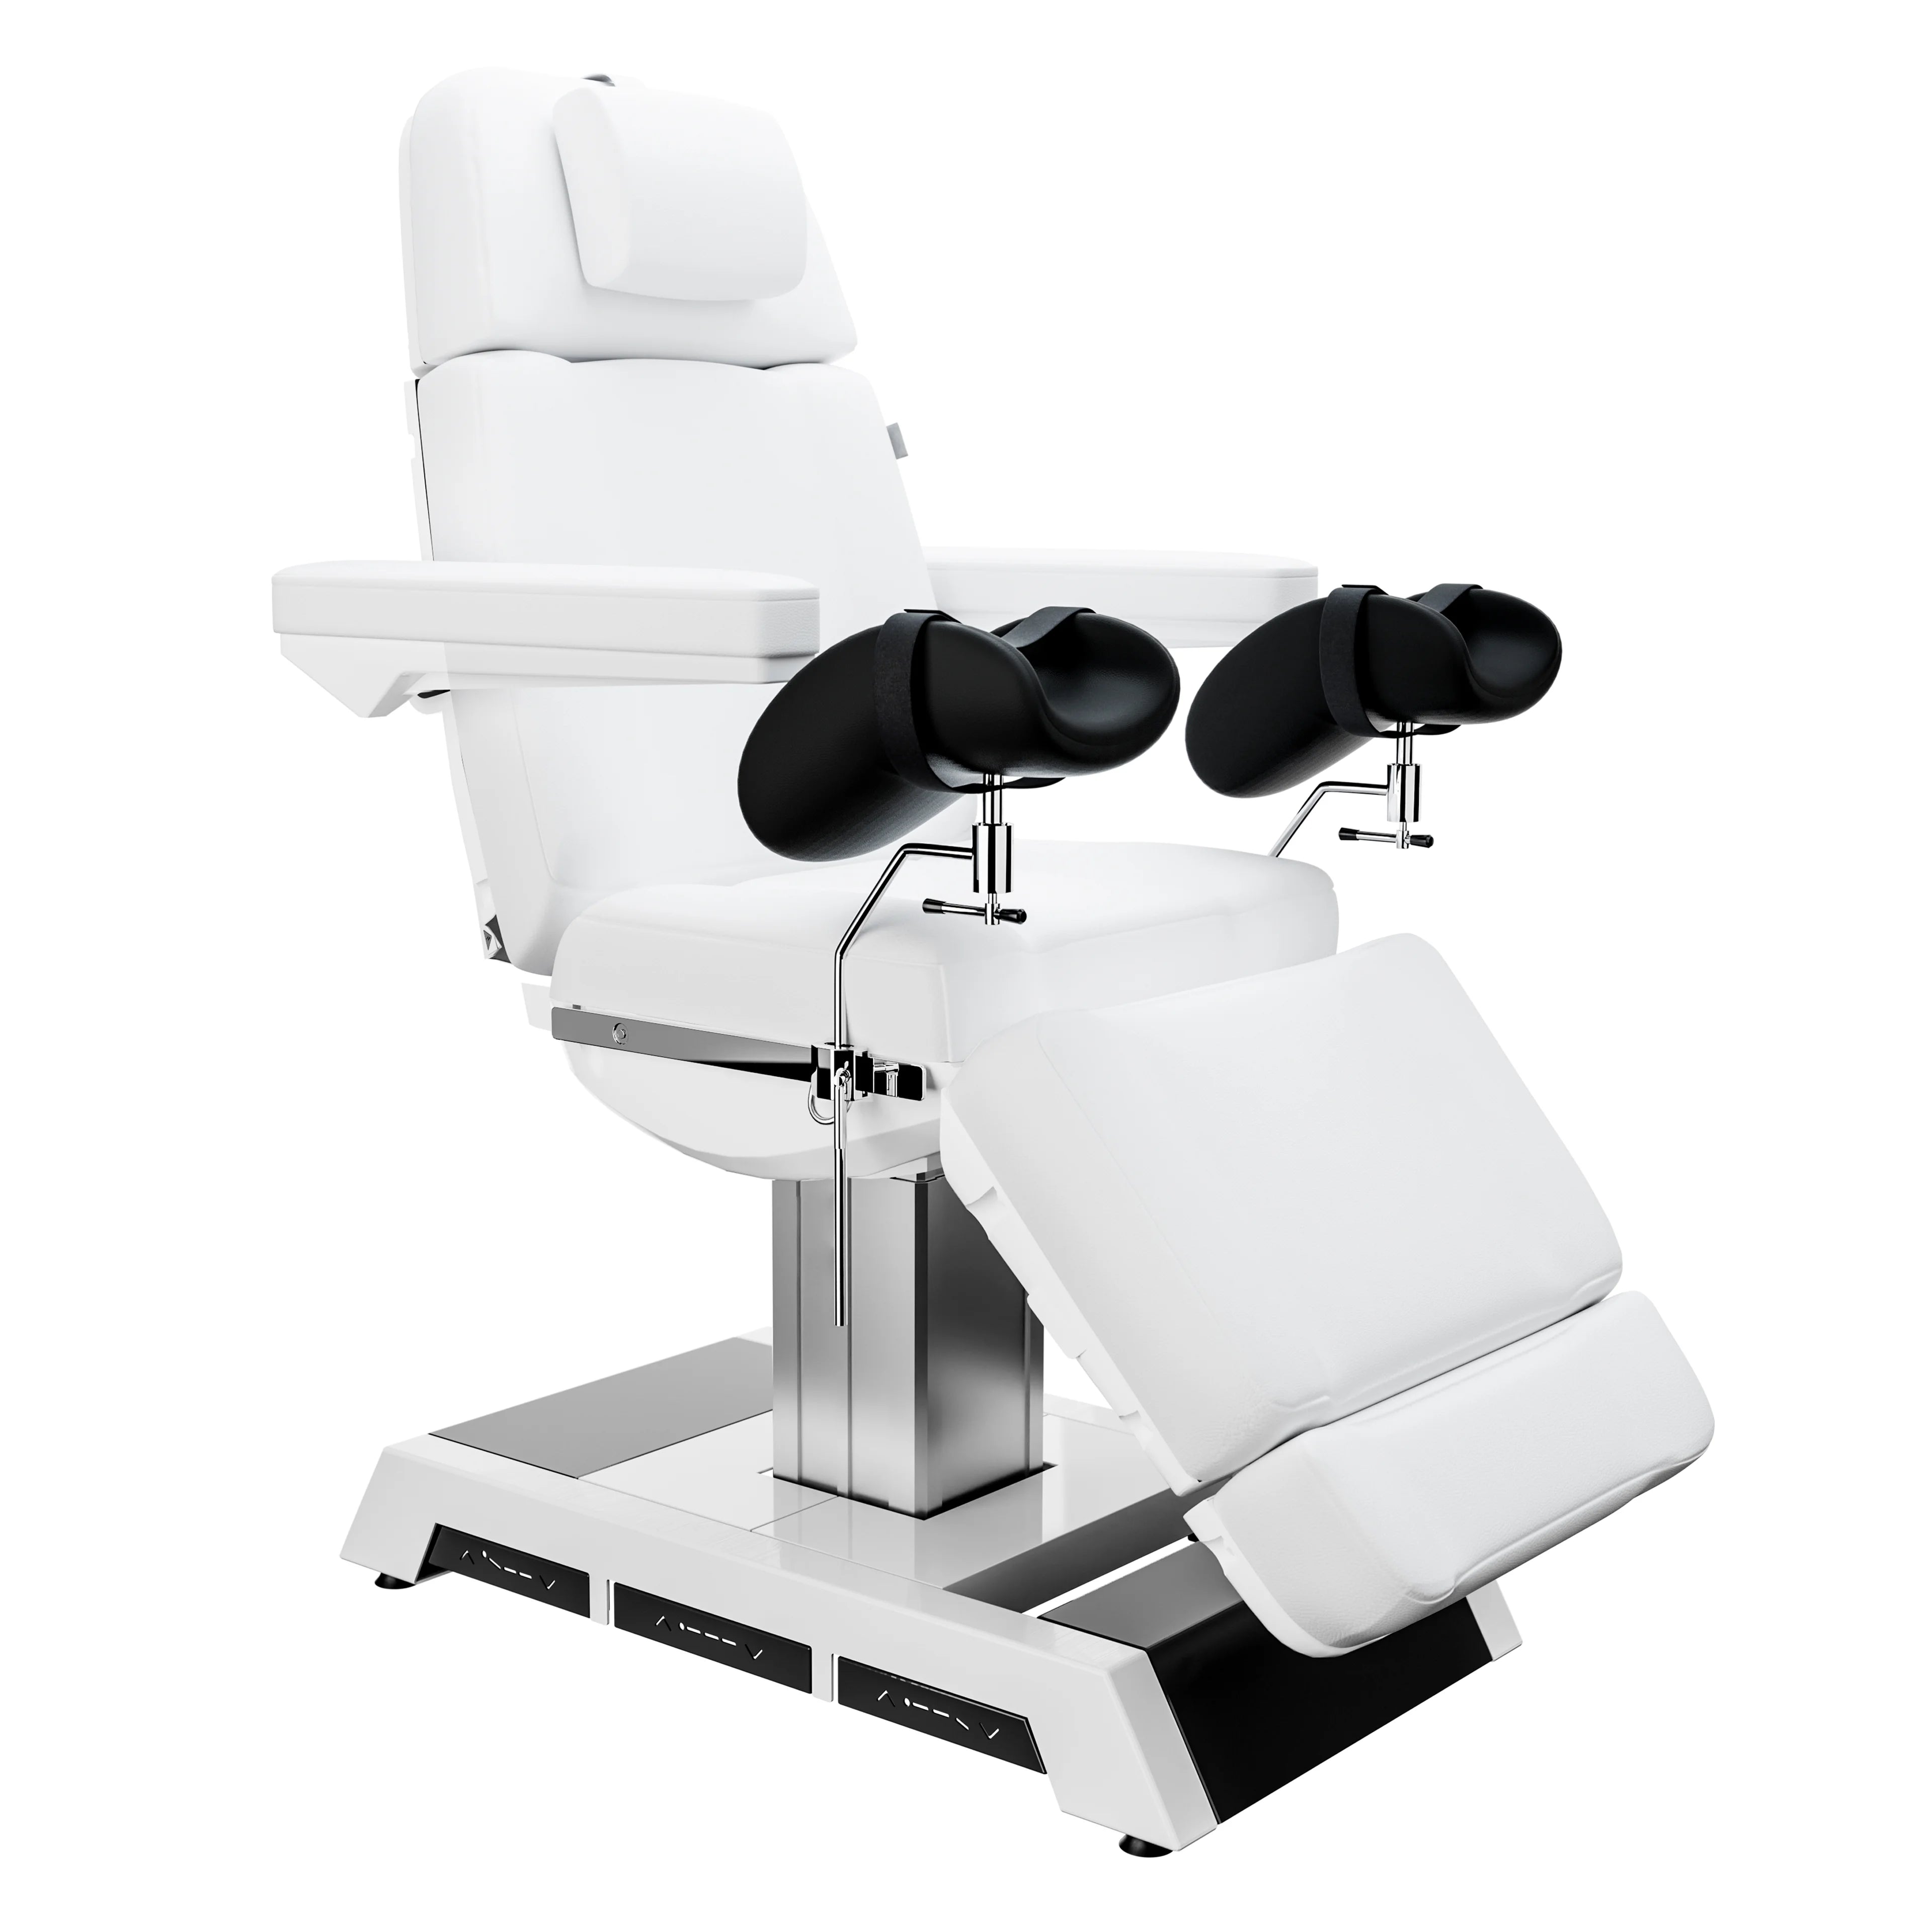 SPAMARC . Adones (White) . OBGYN & GYNECOLOGY . STIRRUPS . 4 MOTOR SPA TREATMENT CHAIR/BED